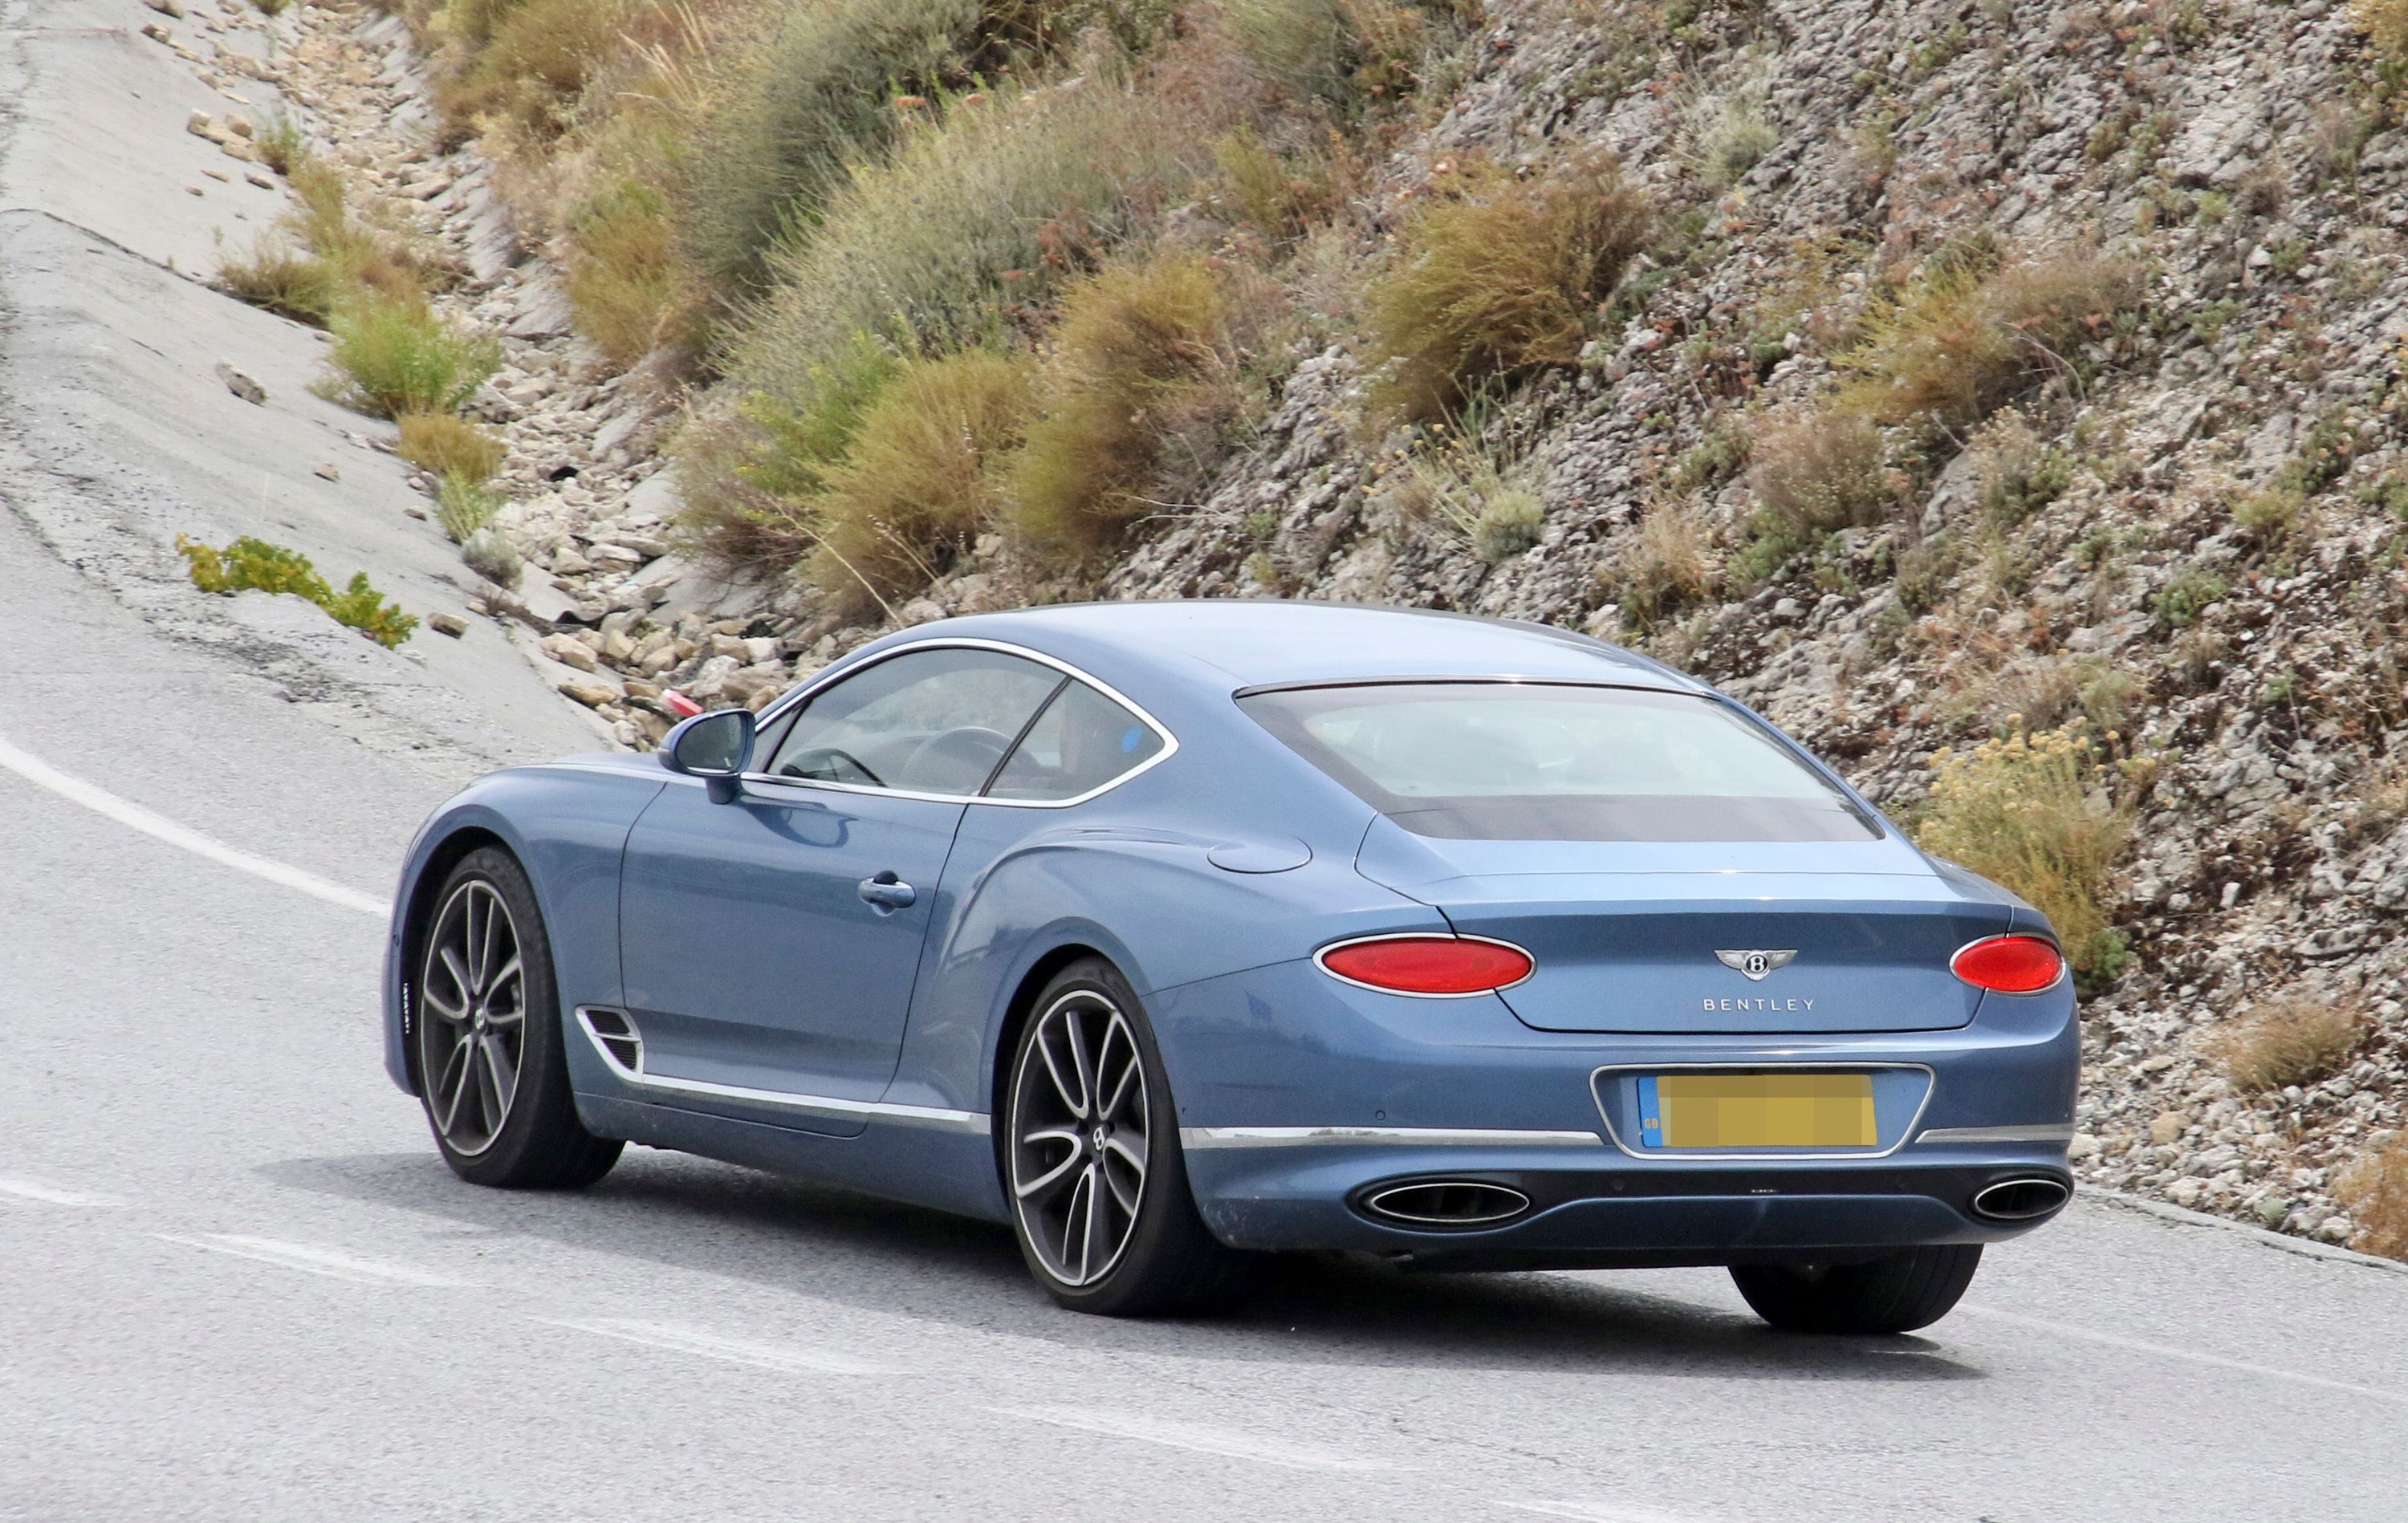 2020 A Bentley Continental GT Hybrid was Spotted Mixing The Best Of Both Worlds